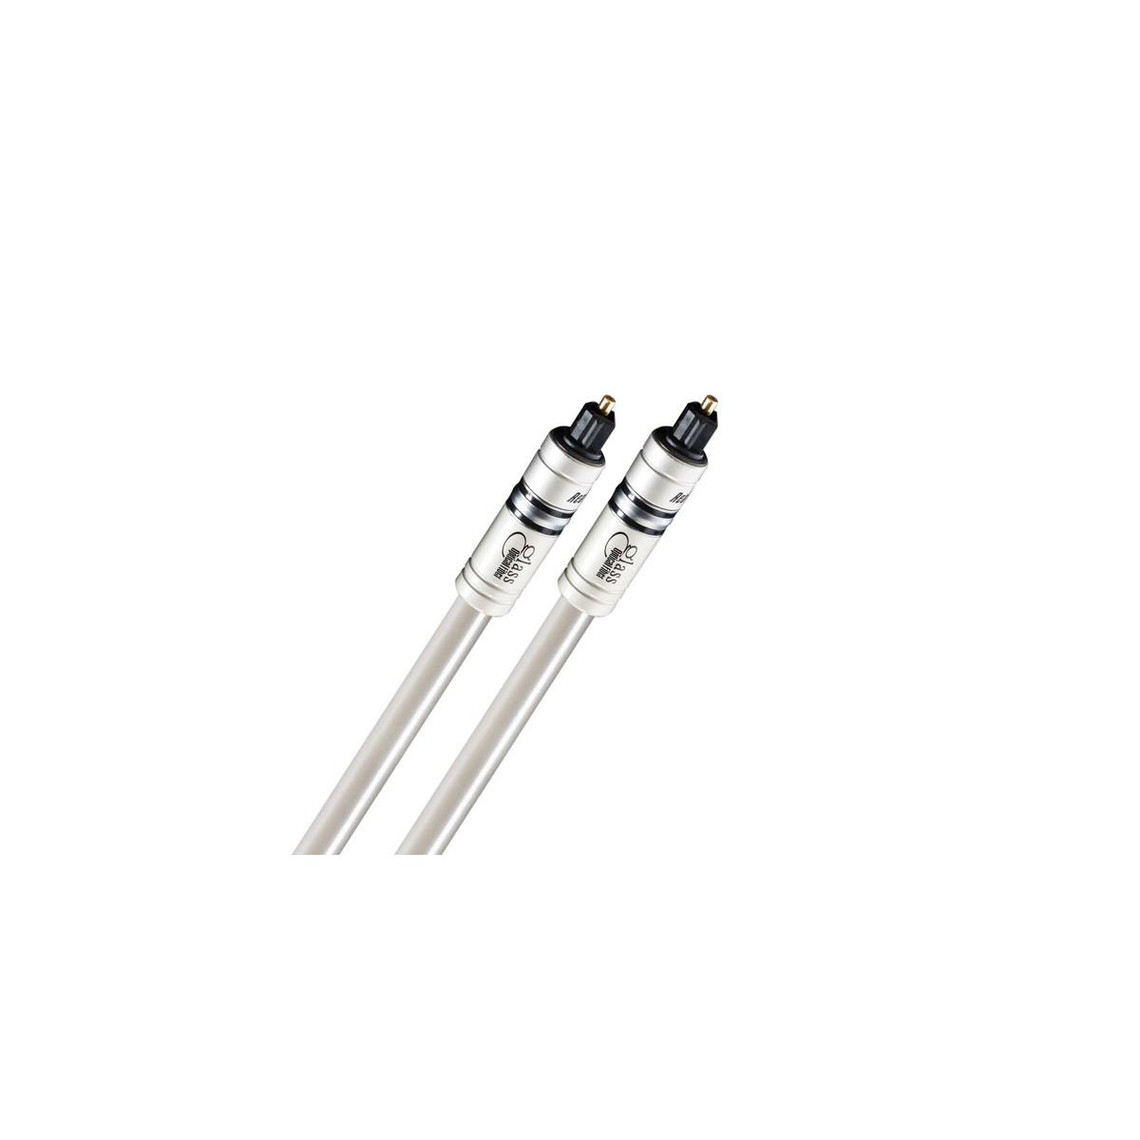 Real cable Real Cable Crystal MK2 - Câble Optique de 0,75 m